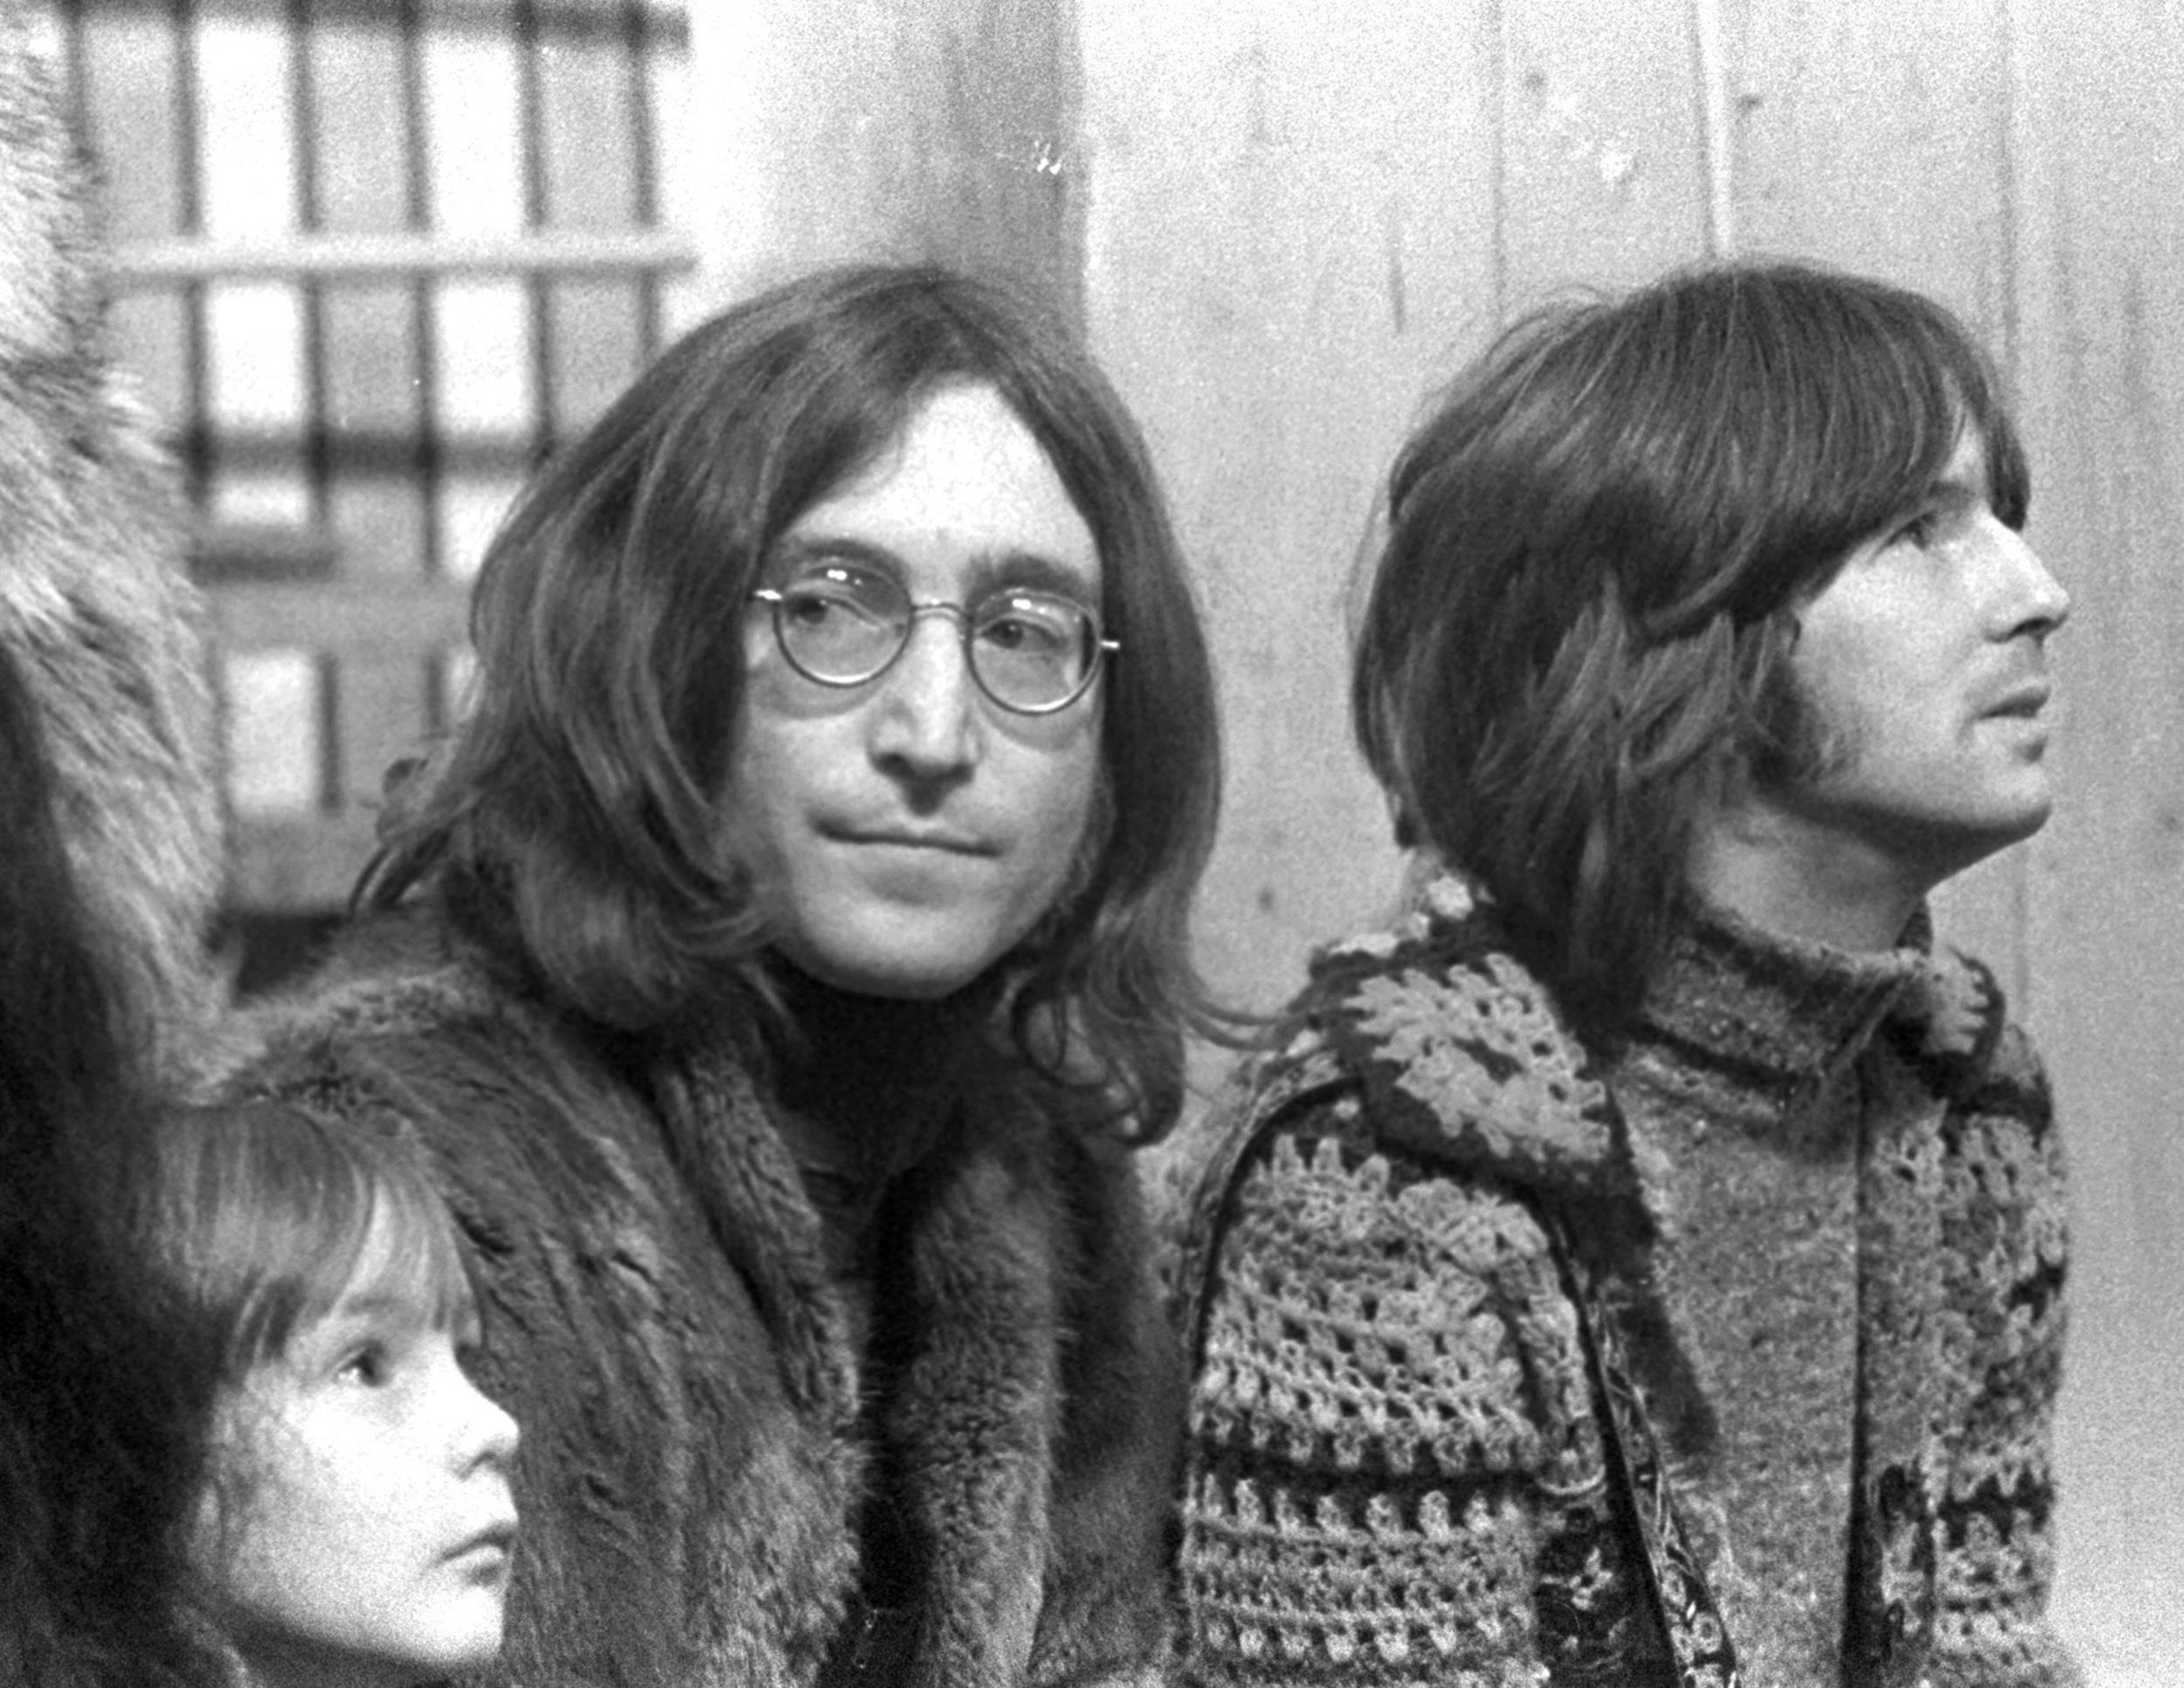 <p>Lennon wrote this song in India while trying to coax Prudence Farrow (sister of Mia) out of her shell on the orders of Maharishi Mahesh Yogi. Divorced of its context, it’s a wonderfully encouraging song. “The sun is up, the sky is blue/It’s beautiful, and so are you.” Due to Ringo’s brief absence from the band, the percussion is mostly limited to tambourines and handclaps. (McCartney adds a drum fill at one point.) It’s a gentle, big-hearted track that brings the LP back to Earth after the silliness of “Back in the U.S.S.R.”</p><p><a href='https://www.msn.com/en-us/community/channel/vid-cj9pqbr0vn9in2b6ddcd8sfgpfq6x6utp44fssrv6mc2gtybw0us'>Follow us on MSN to see more of our exclusive entertainment content.</a></p>